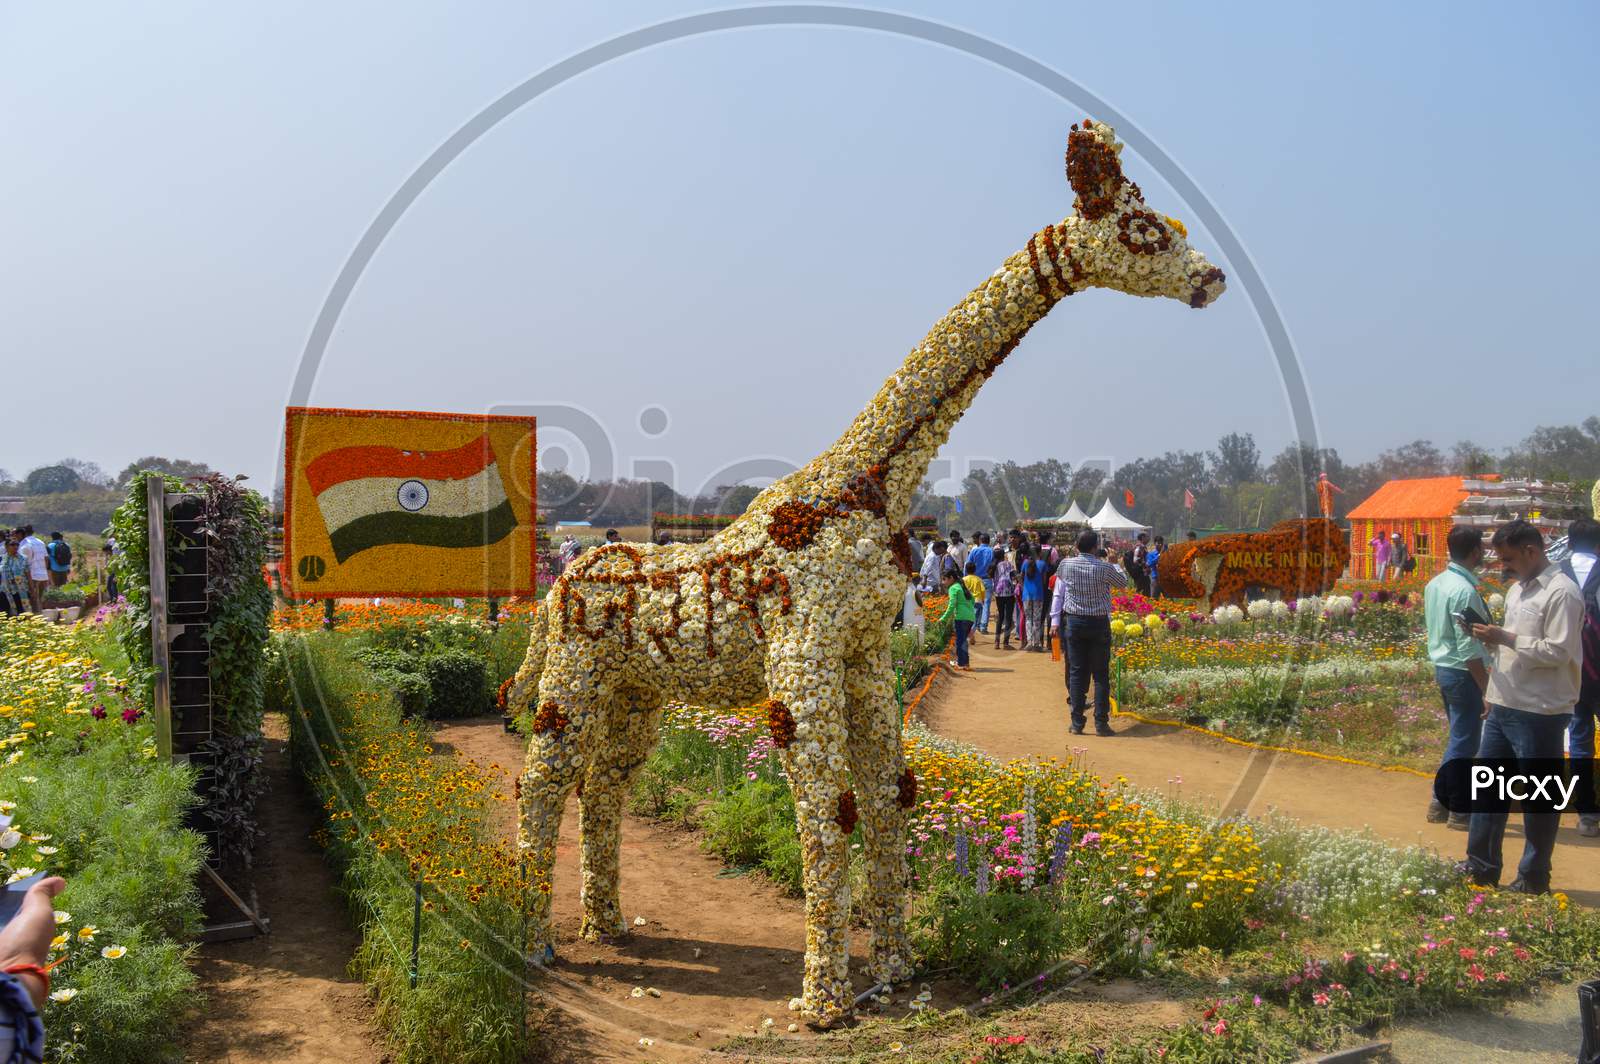 The Giraffe Which Is Made Of Cotton And News Paper, Flowers Are There For Exhibition At Pusa, Agriculture Festival, New Delhi.Indian Flag.